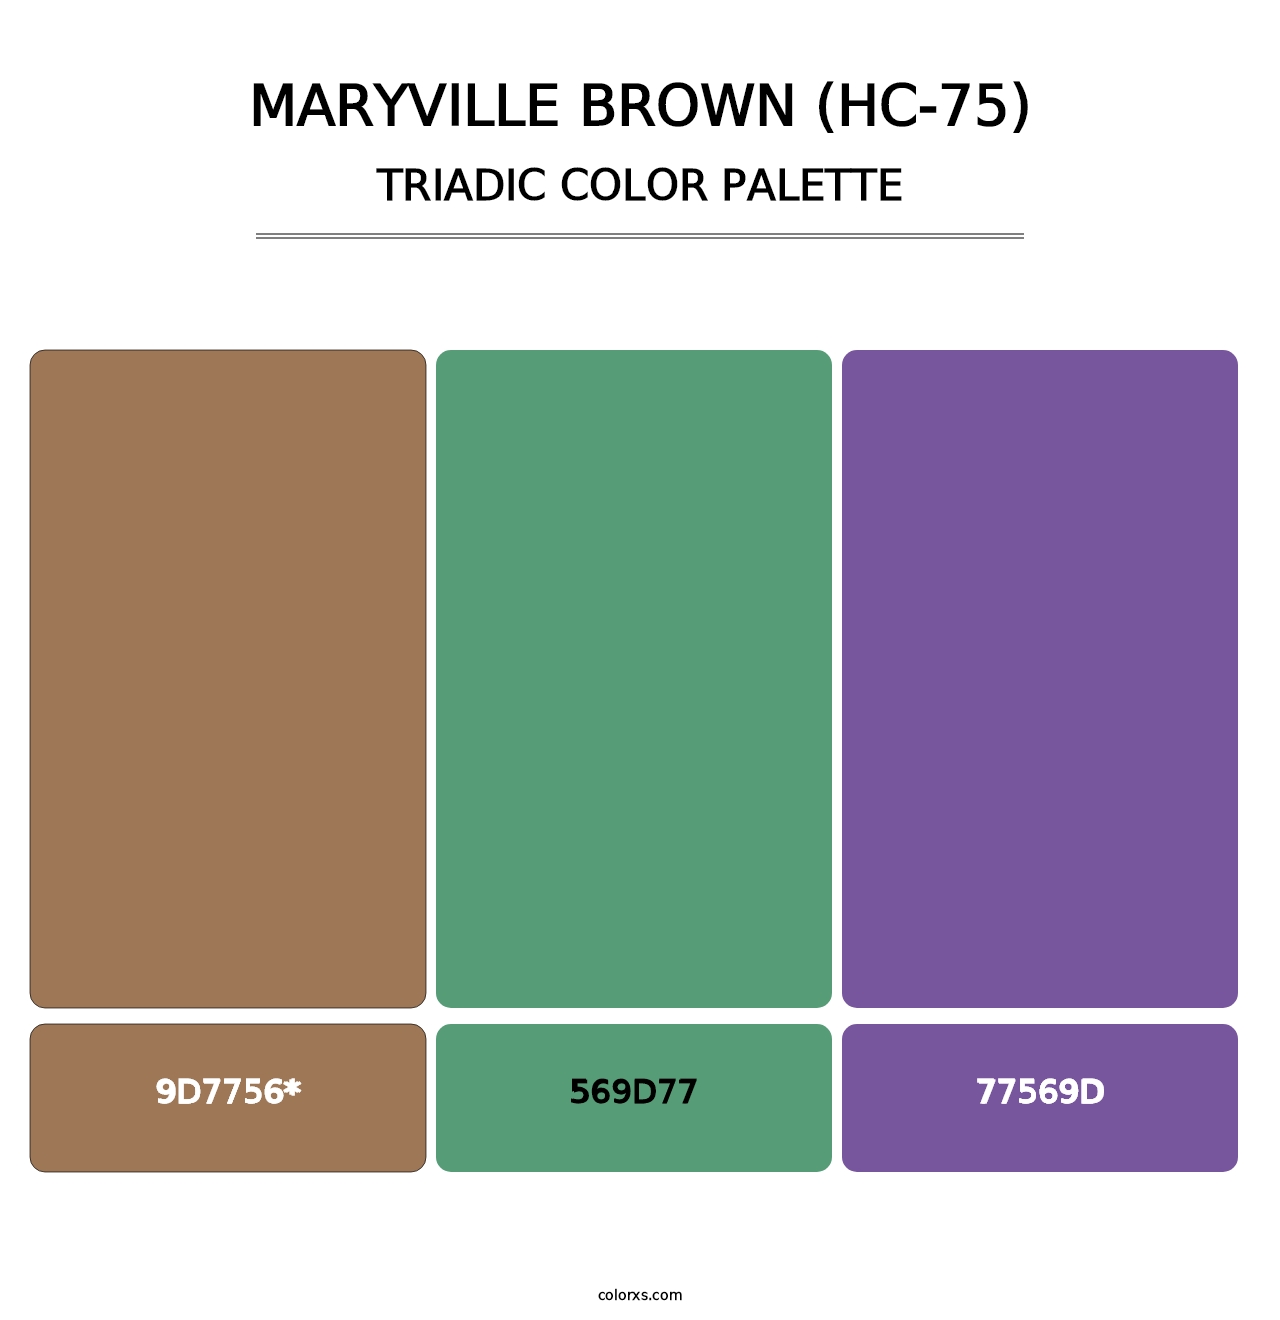 Maryville Brown (HC-75) - Triadic Color Palette